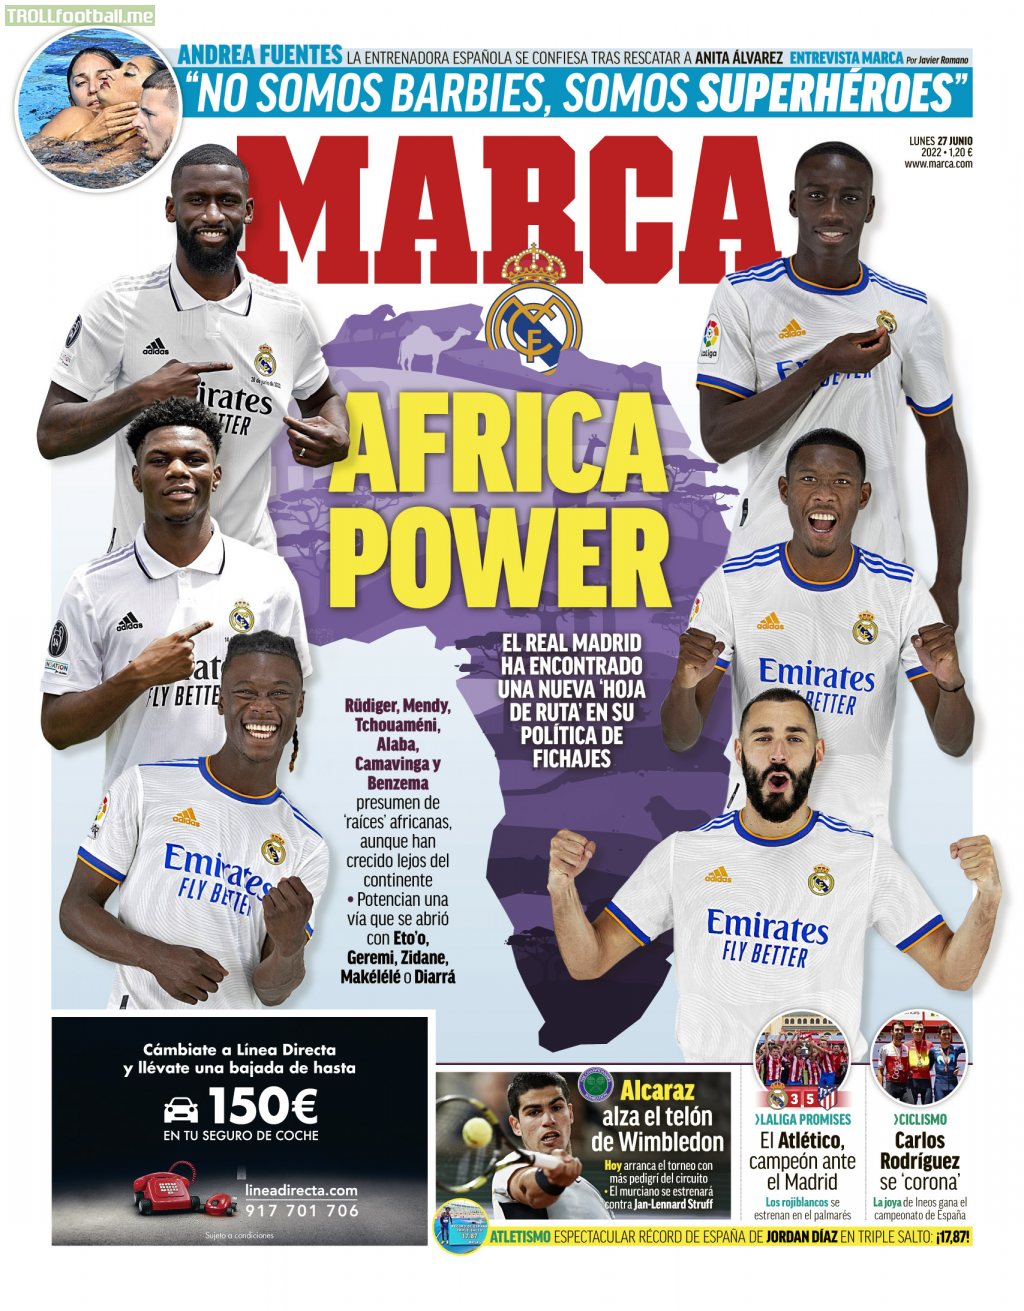 [Marca] Marca's cover: "Africa Power"